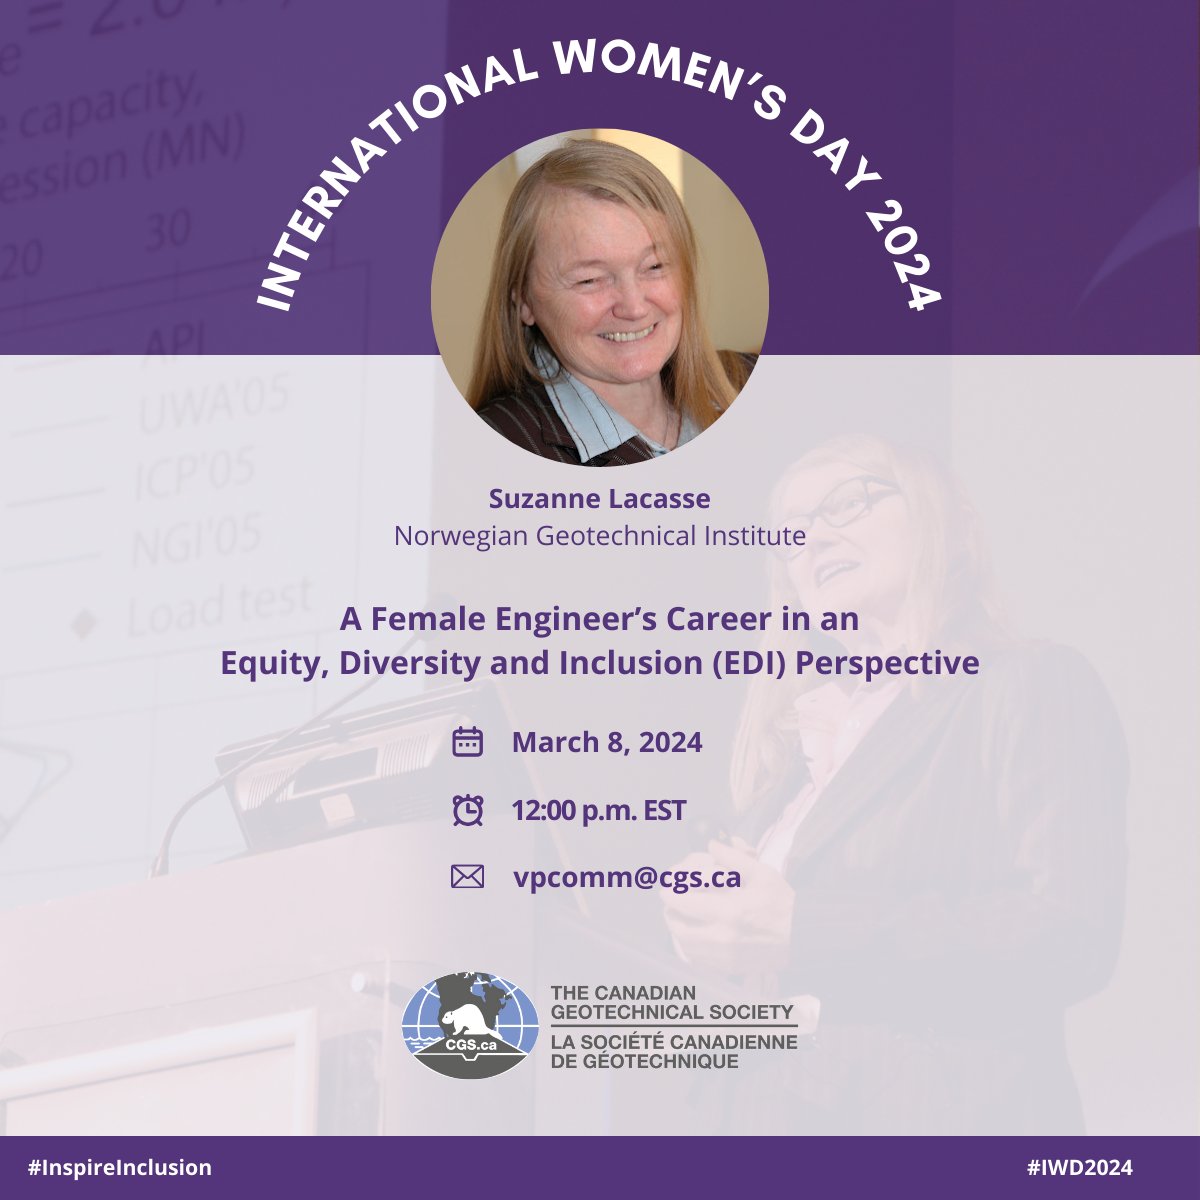 Please join the CGS in celebrating International Women’s Day on March 8, 2024! 🗣 Suzanne Lacasse 💡 A Female Engineer’s Career in an Equity, Diversity & Inclusion (EDI) Perspective 📆 March 8, 2024 | 12 pm EST 🔗events.teams.microsoft.com/event/1c626988… Register today! ⬆ #IWD2024